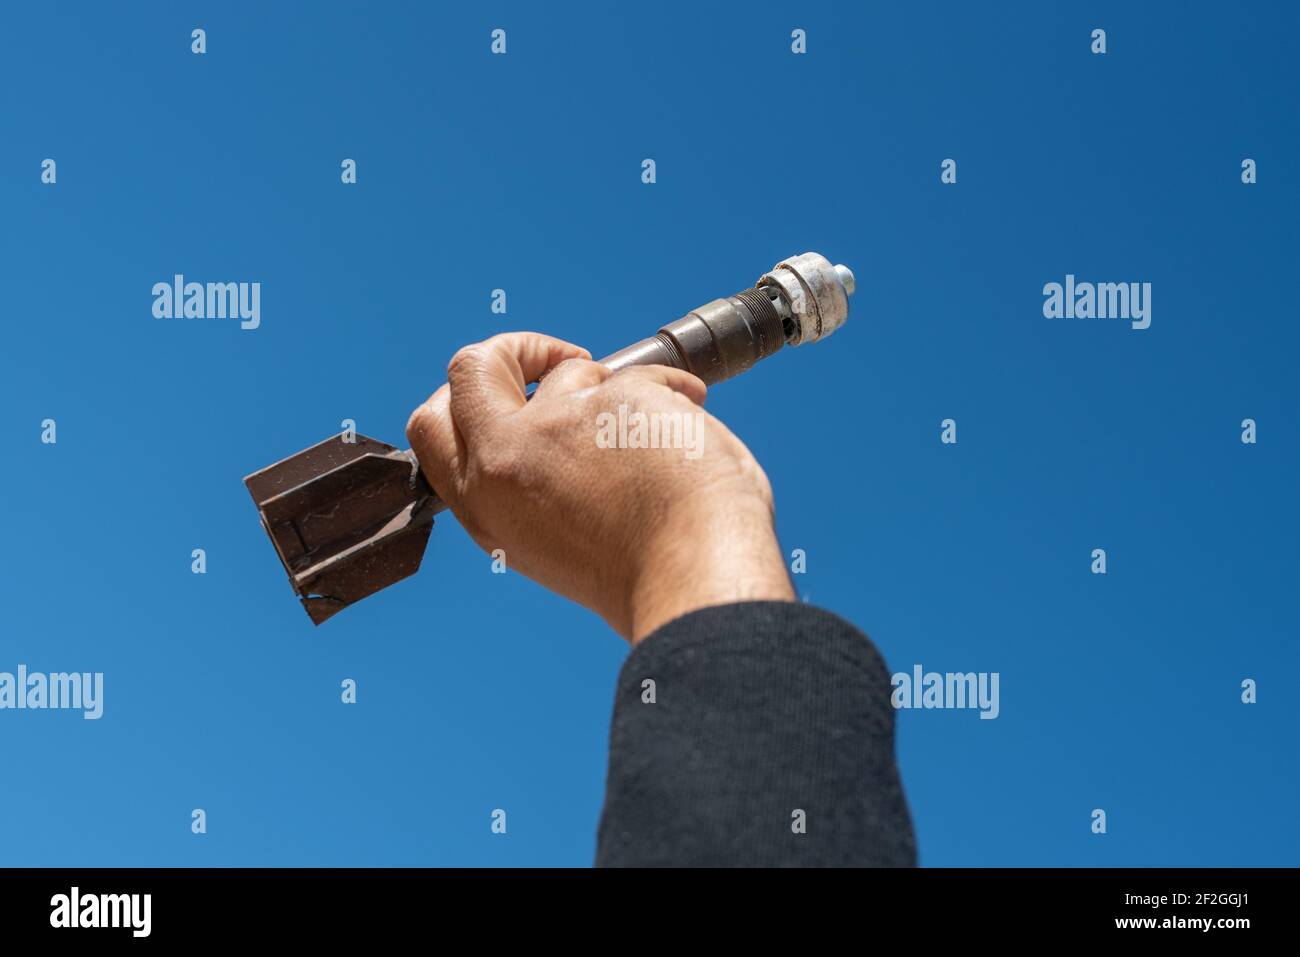 Mortar weapon bomb in man hands on blue sky background. Stock Photo